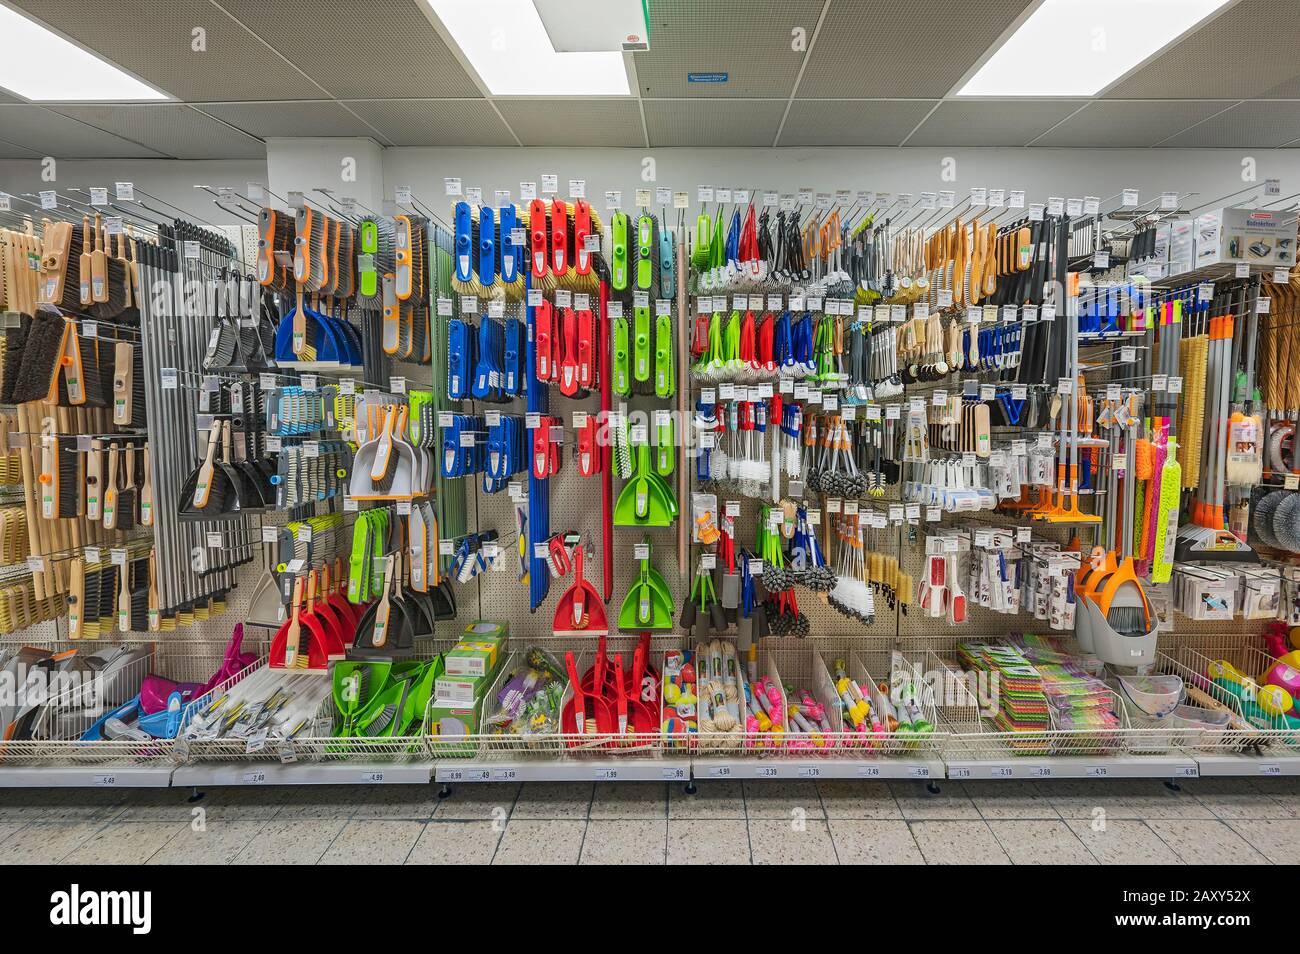 Brooms and brushes, supermarket, Germany Stock Photo